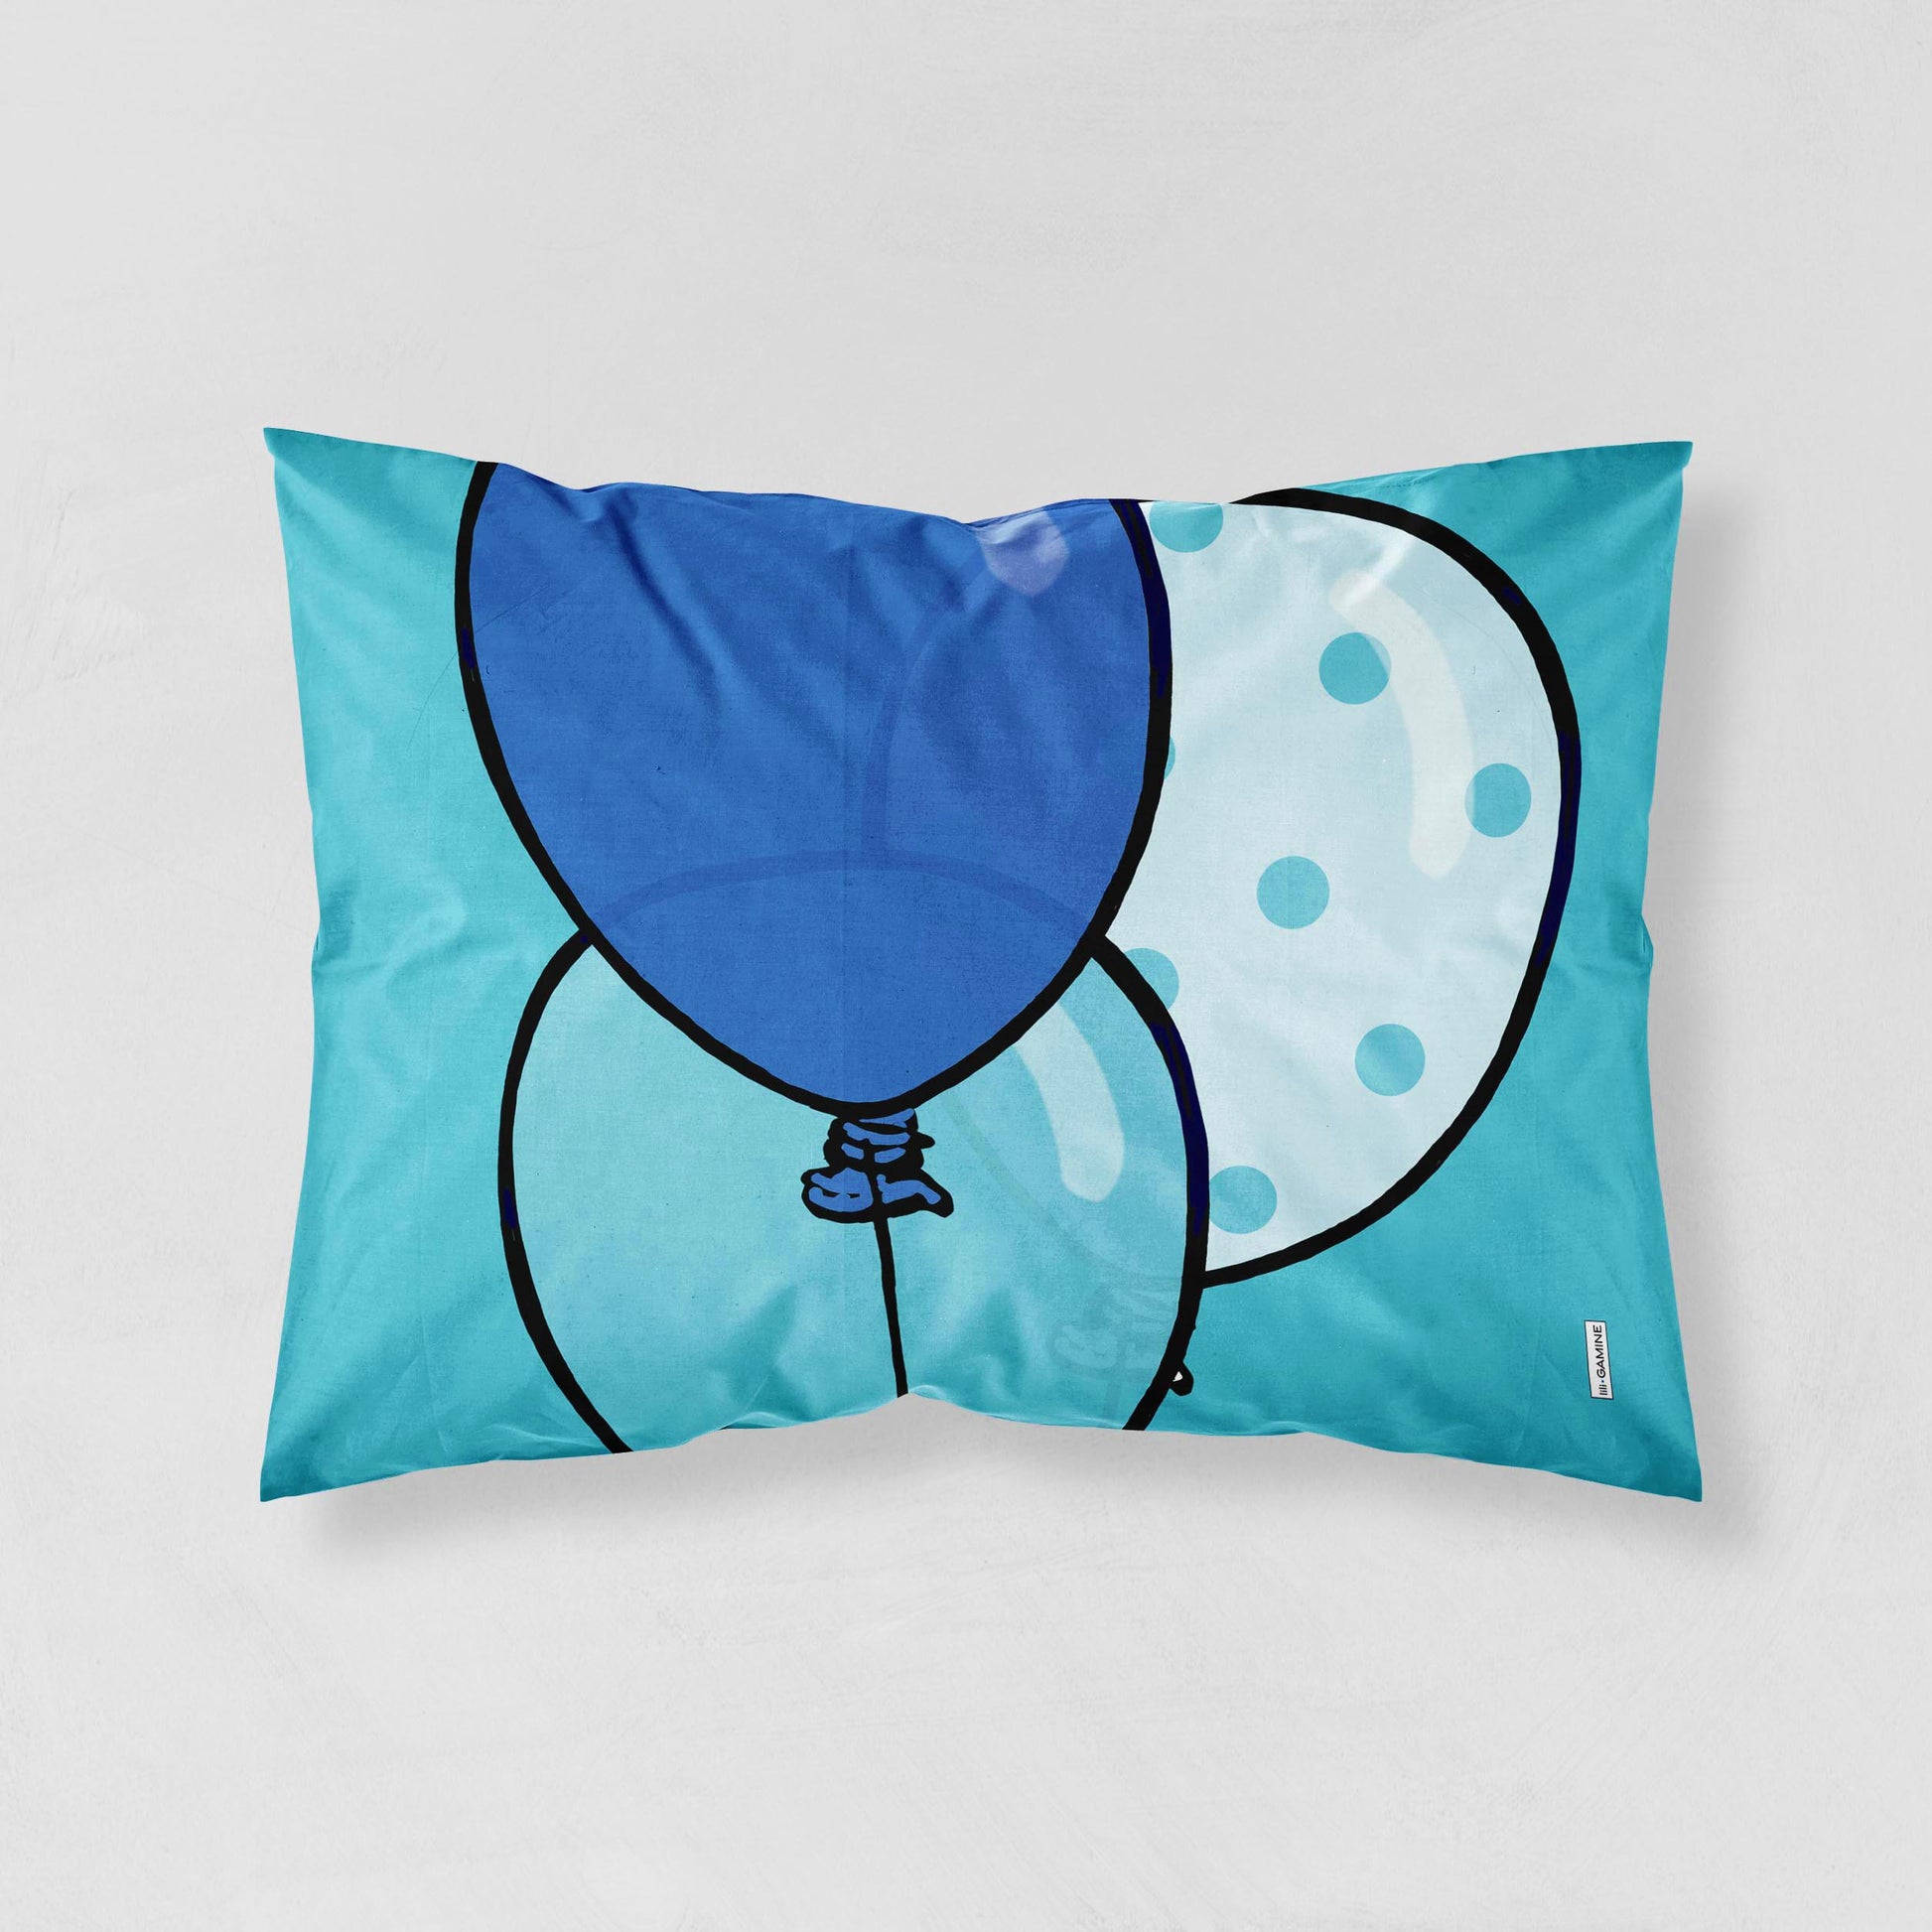 Fun Balloon Pillow Cover by Lili Gamine